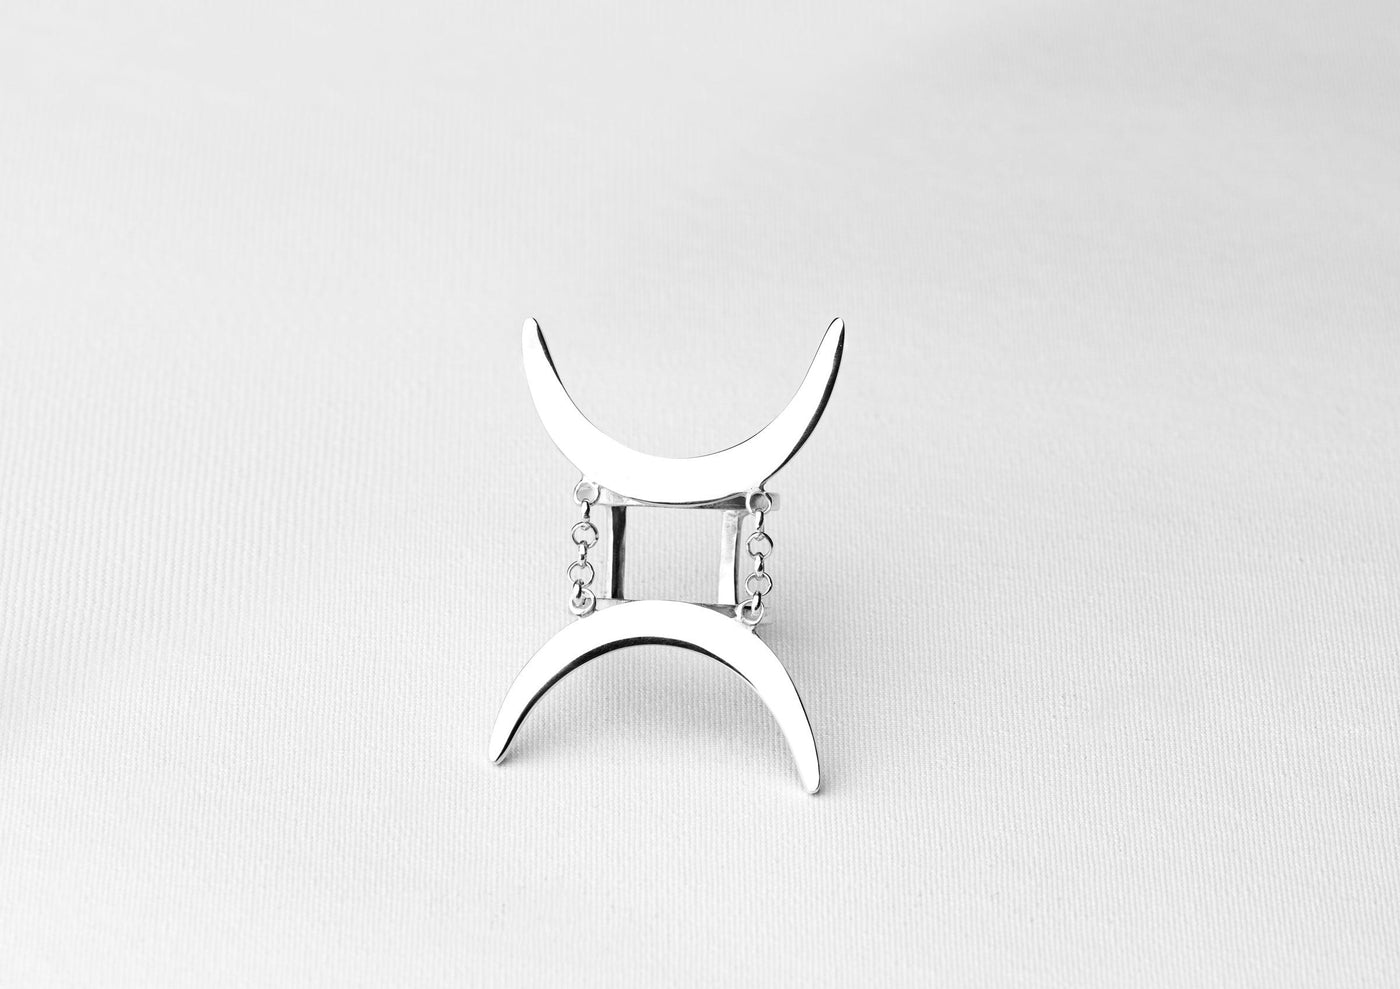 Gemini Avant-garde Ring- Fully handmade of Sterling Silver 925. Contemporary unique design of limited edition by Mystic J for your luxury look.